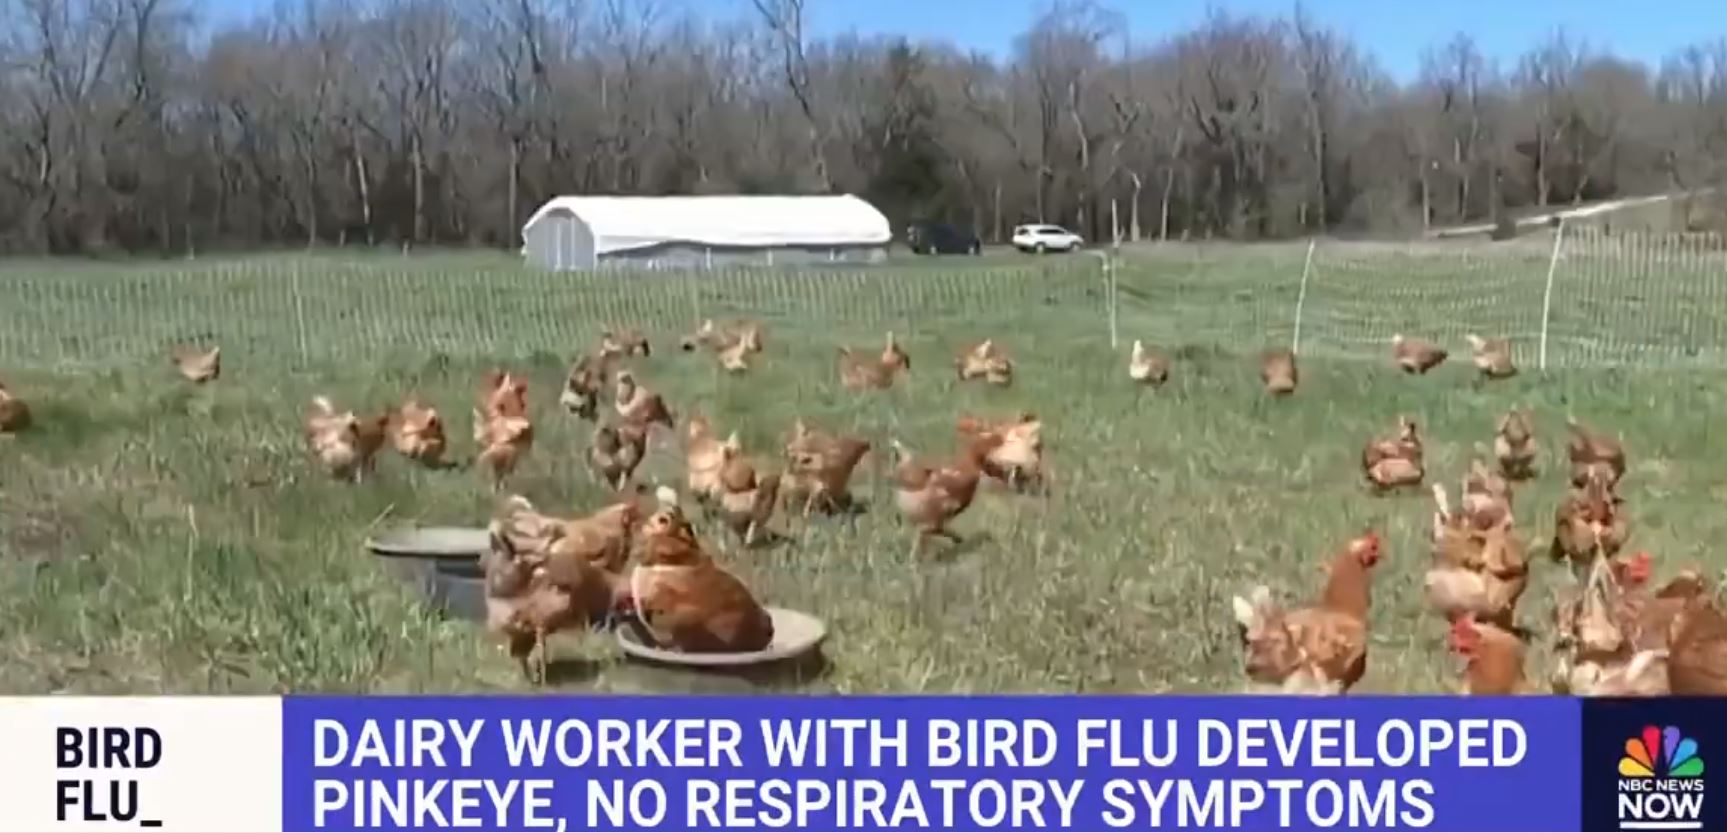 Here we go... Farm worker contracts bird flu in first reported case of transmission from farm animals to humans |  The Gateway expert